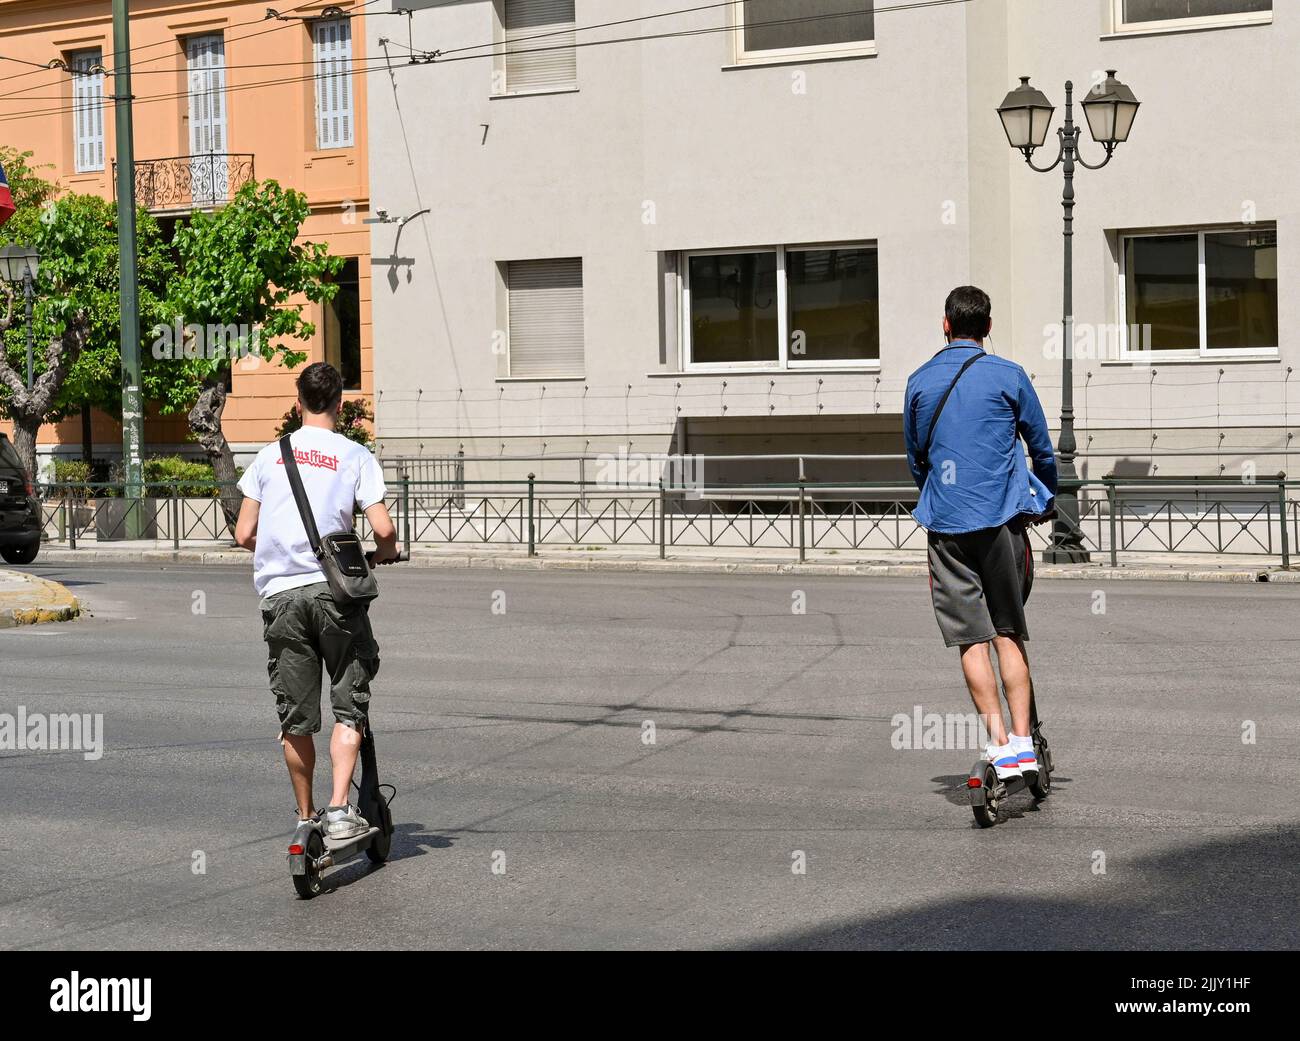 Athens, Greece - May 2022: Two young people riding electric scooters on a main road in the city centre Stock Photo